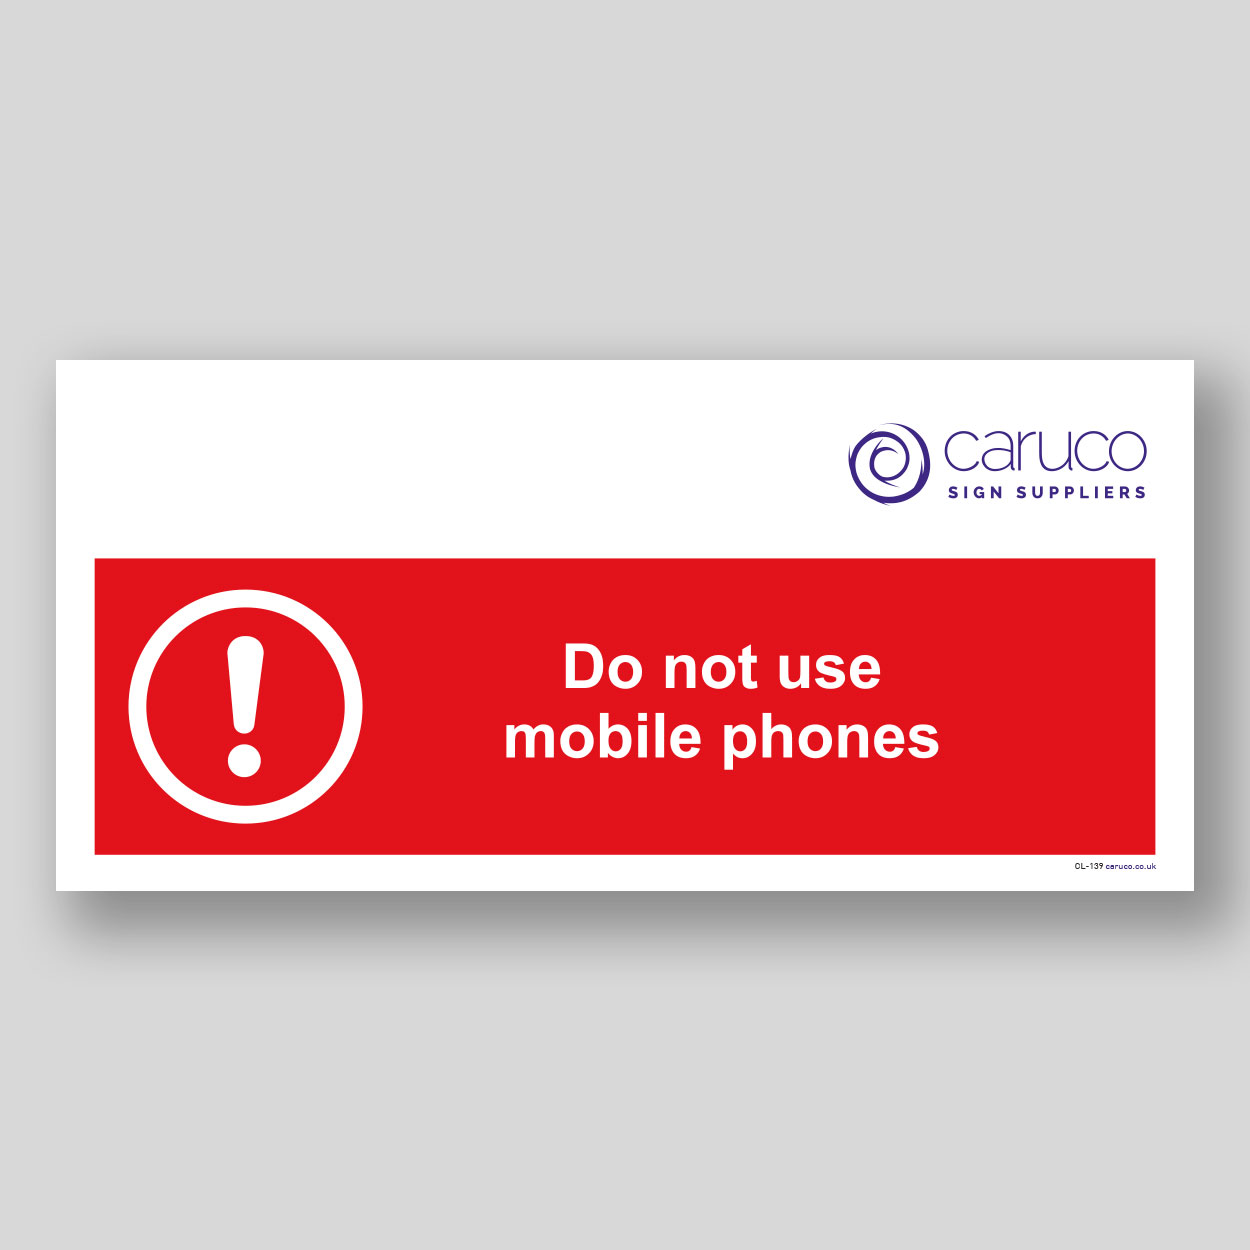 CL-139 Do not use mobile phones